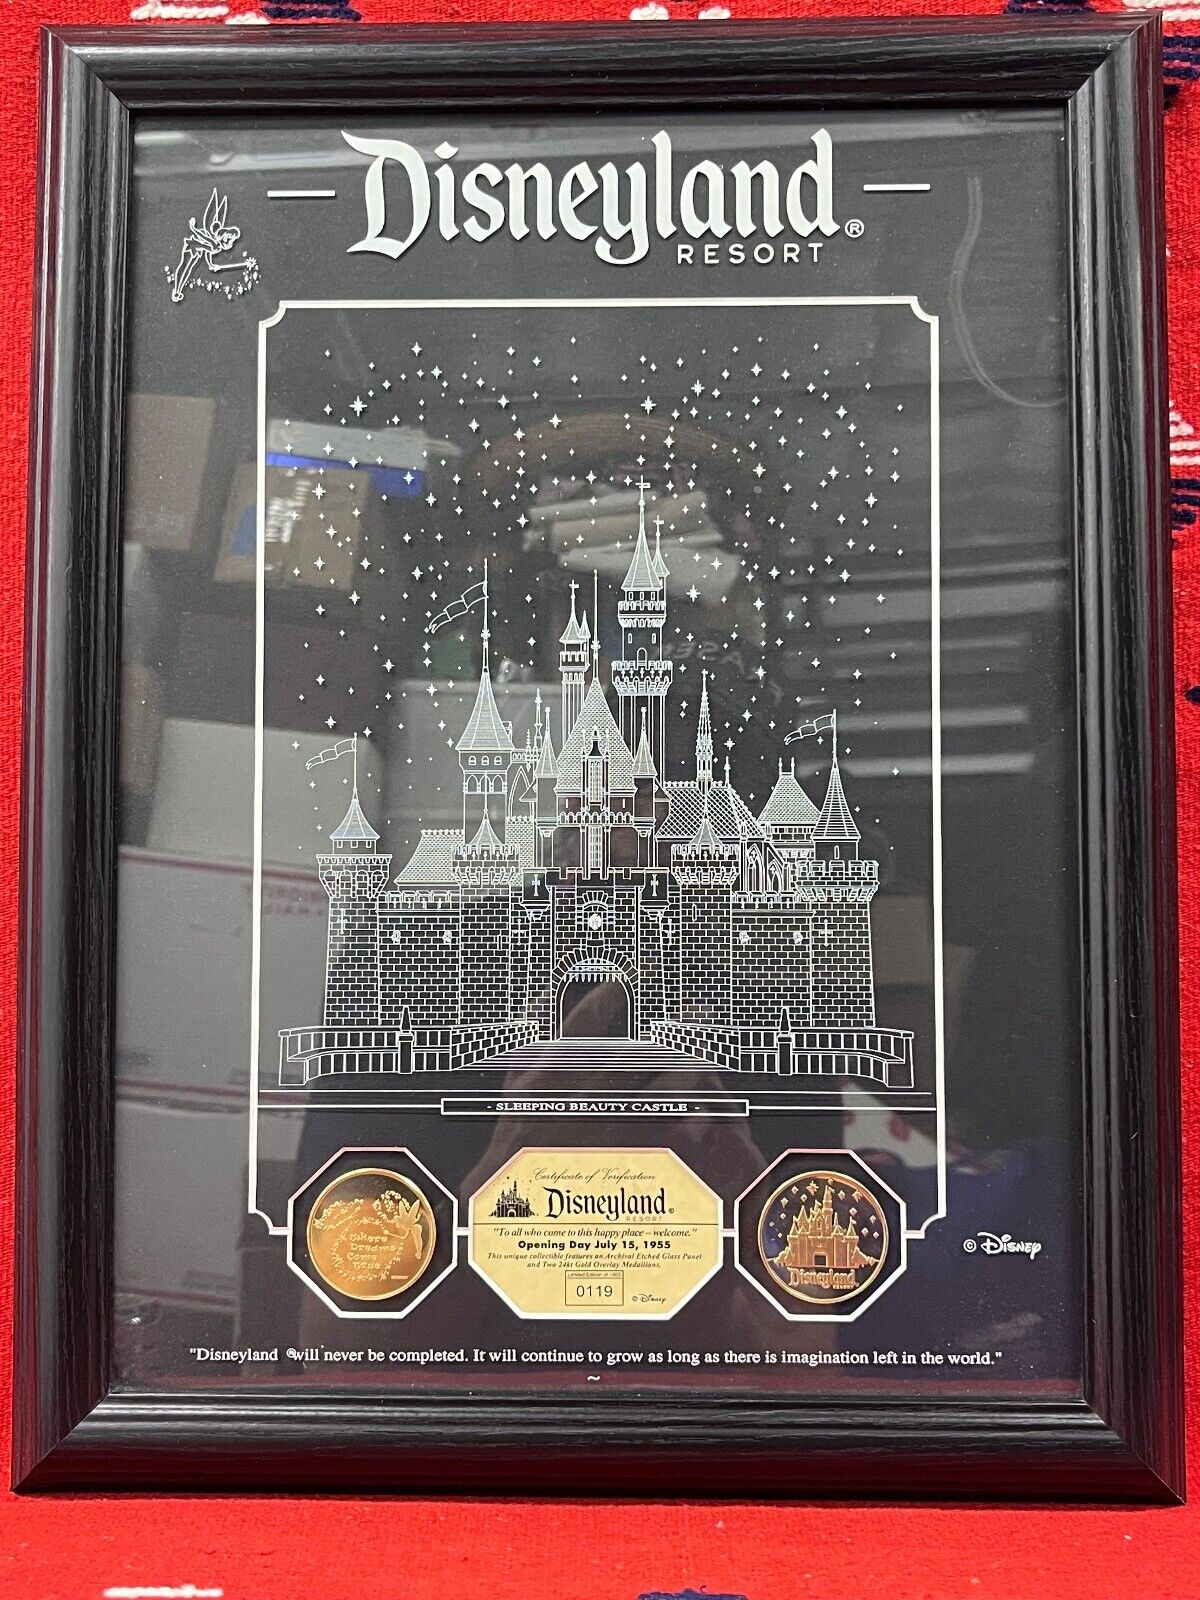 Disneyland Resort Opening Day 1955 Etched Glass Panel Two 24kt Gold Overlay Coin